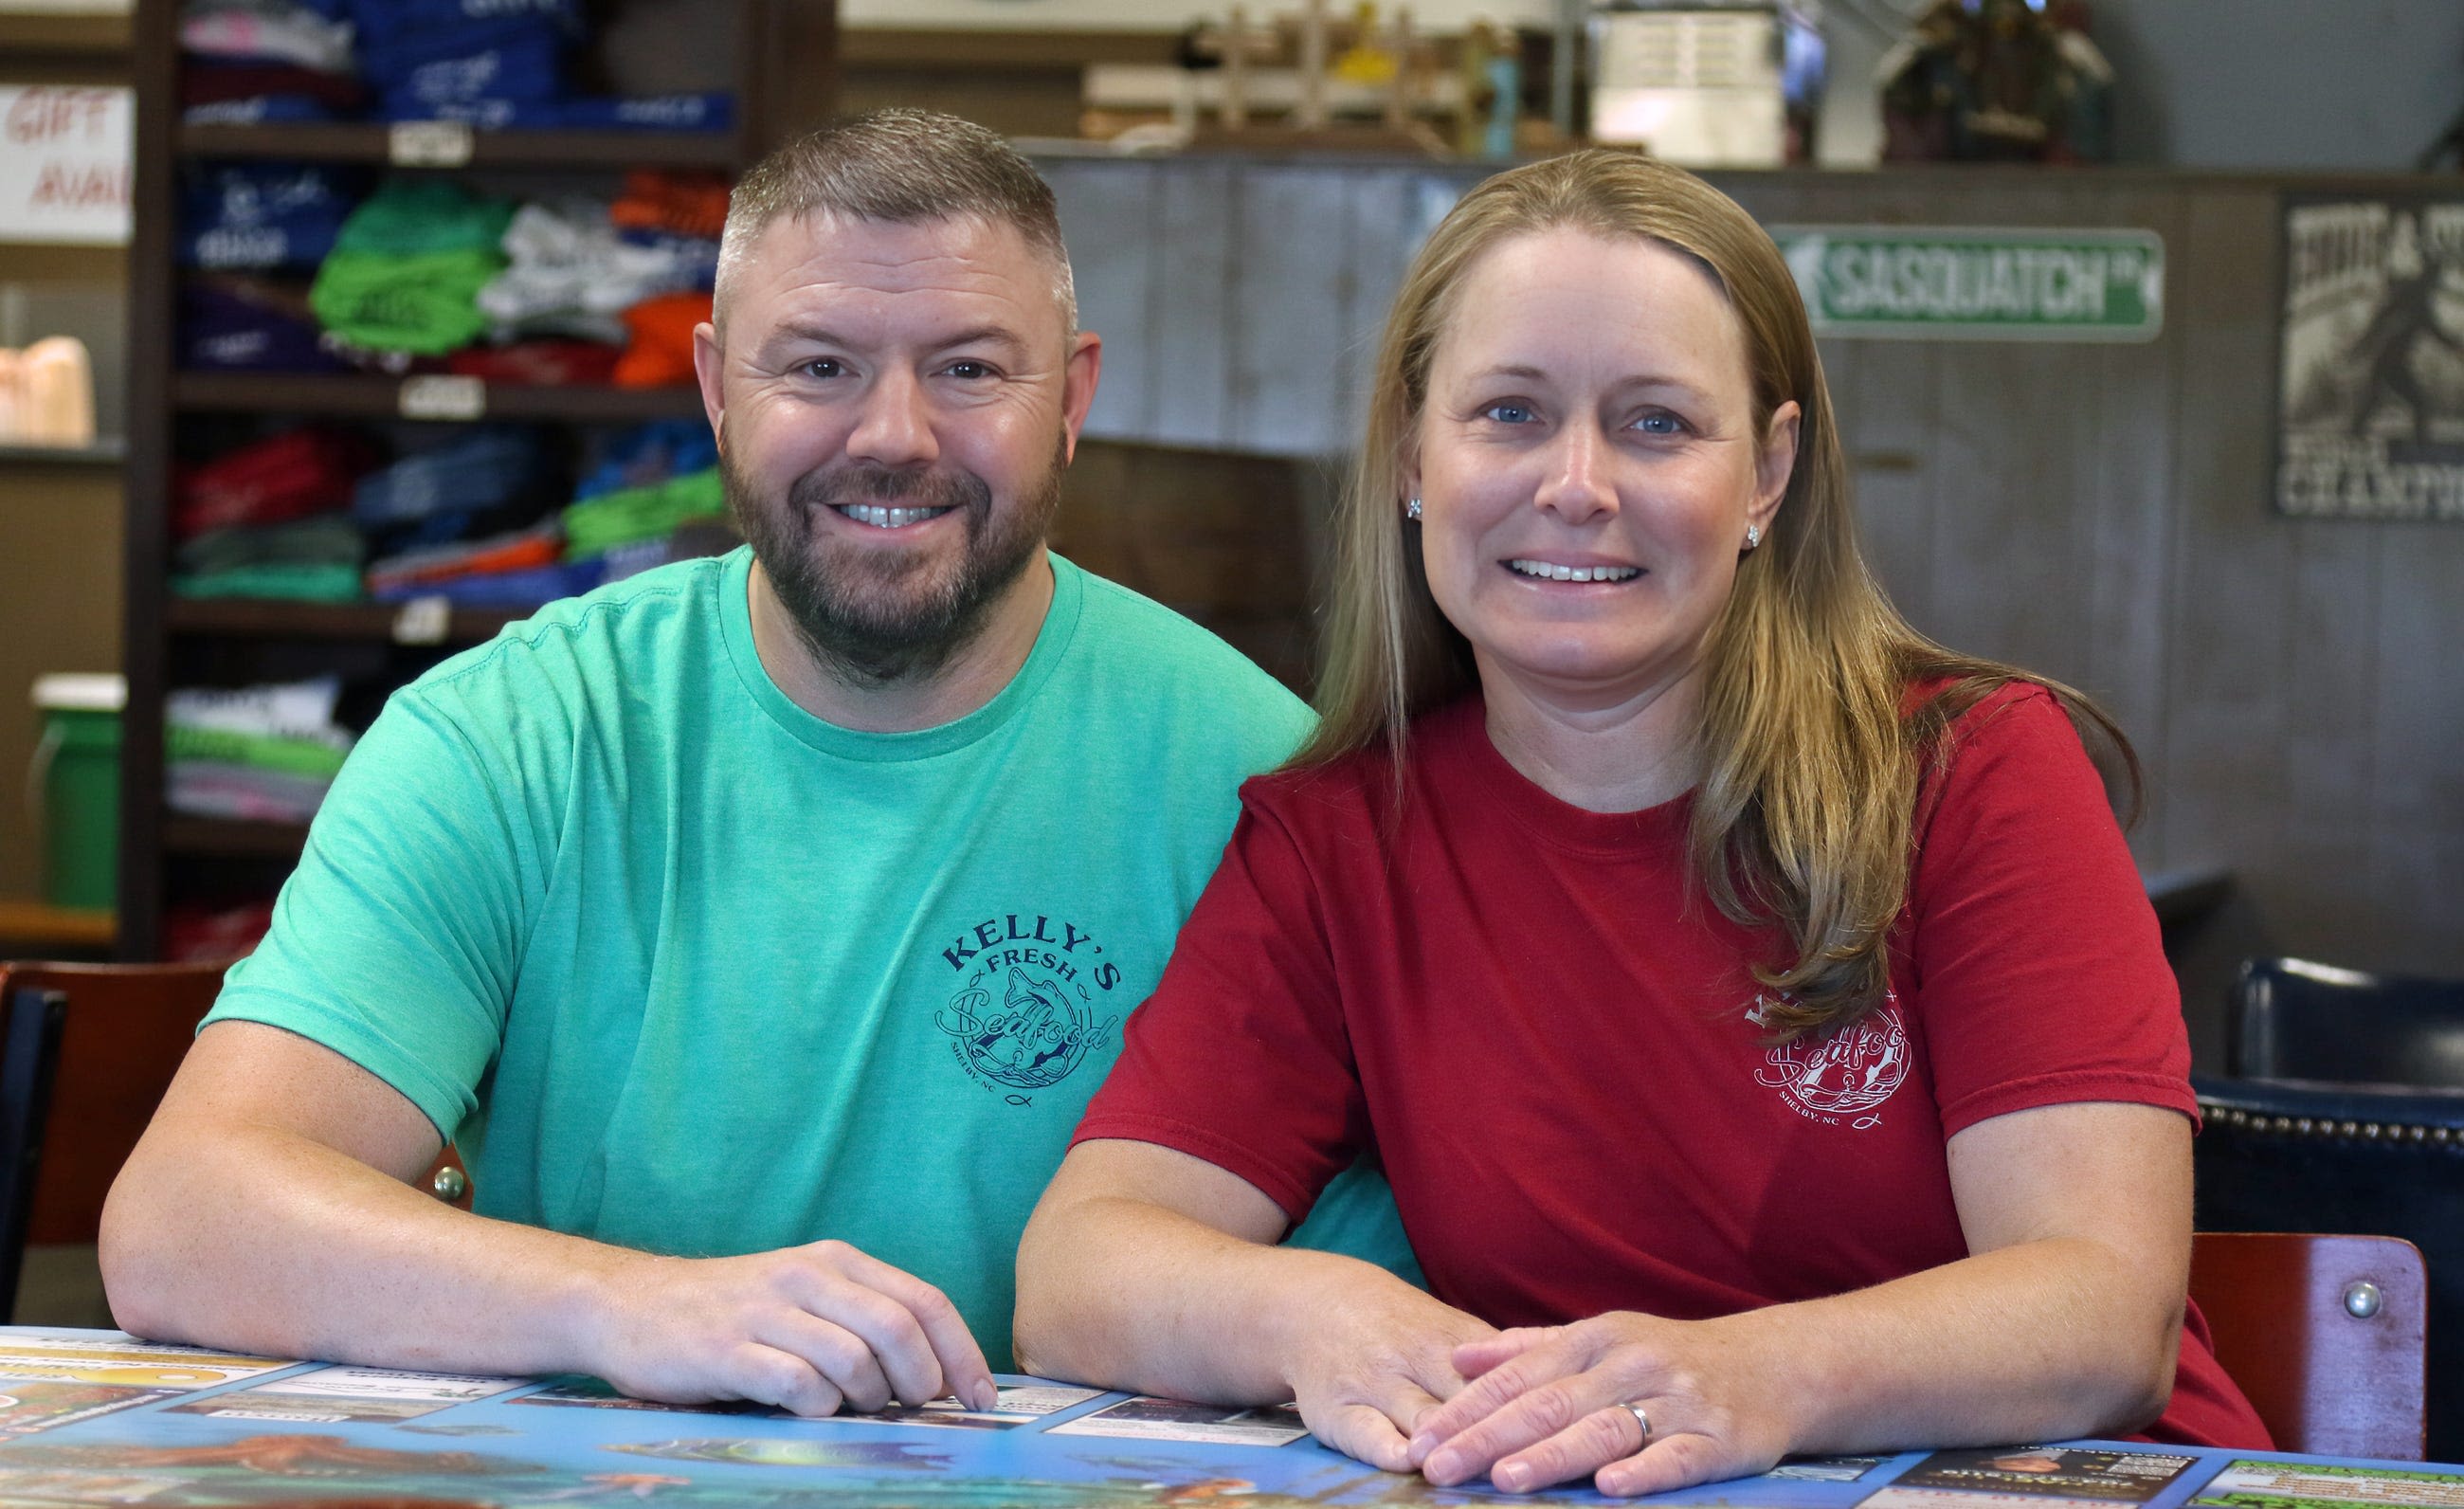 Kelly's Seafood celebrates 40 years of family, faith and food